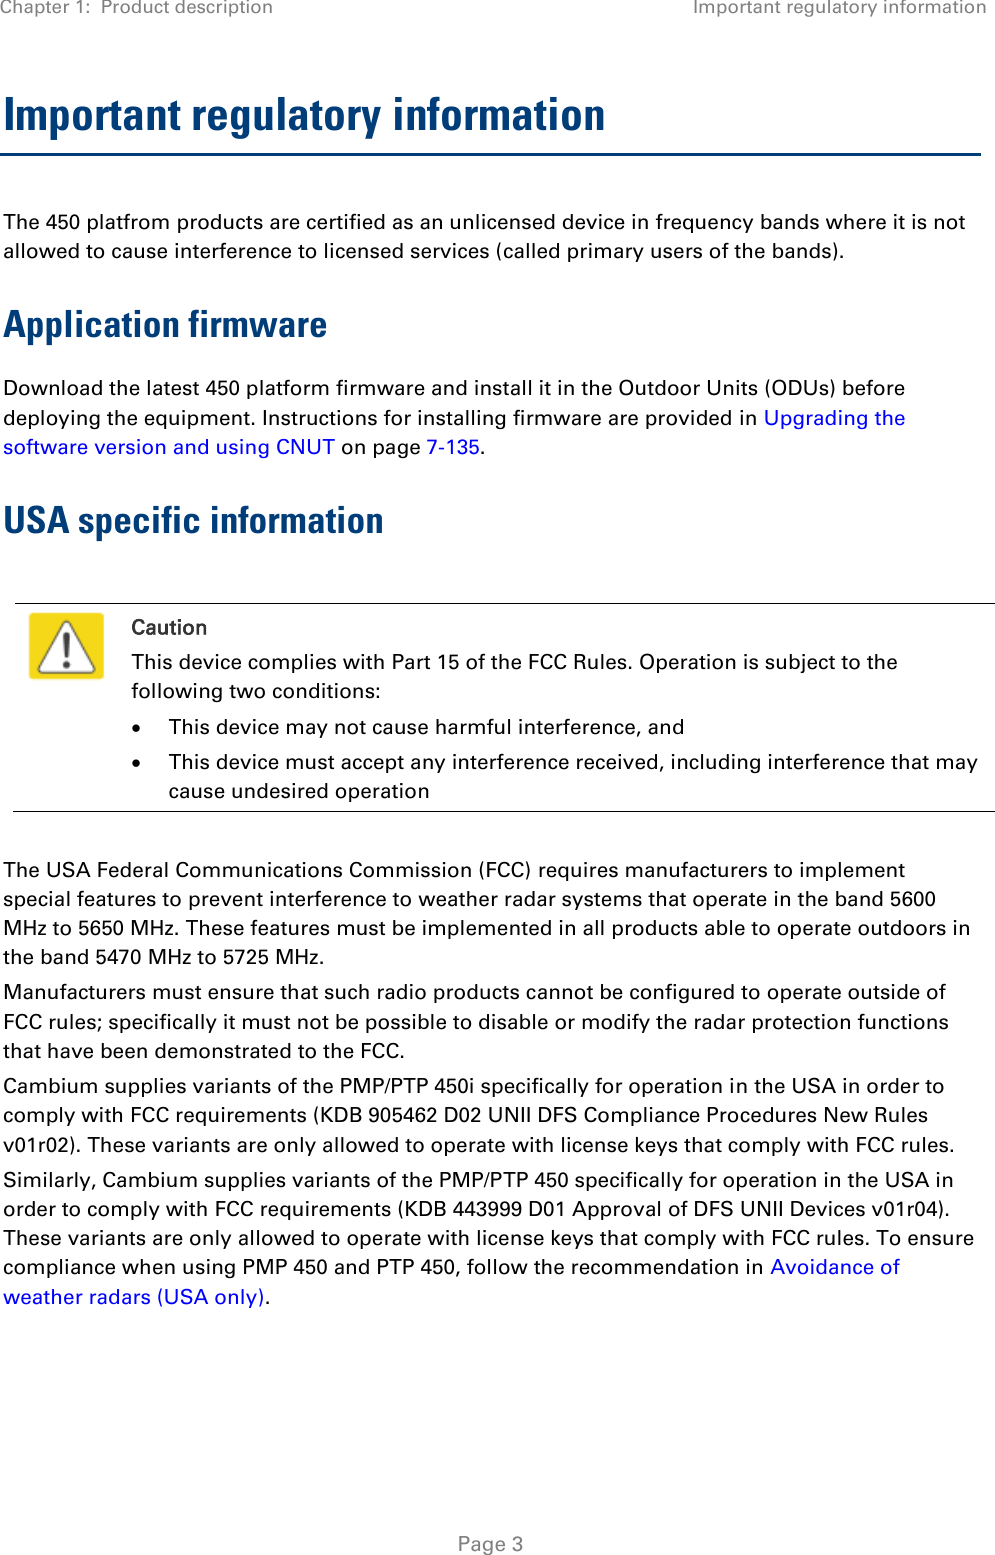 Chapter 1:  Product description Important regulatory information   Page 3 Important regulatory information The 450 platfrom products are certified as an unlicensed device in frequency bands where it is not allowed to cause interference to licensed services (called primary users of the bands). Application firmware Download the latest 450 platform firmware and install it in the Outdoor Units (ODUs) before deploying the equipment. Instructions for installing firmware are provided in Upgrading the software version and using CNUT on page 7-135. USA specific information   Caution This device complies with Part 15 of the FCC Rules. Operation is subject to the following two conditions:  This device may not cause harmful interference, and  This device must accept any interference received, including interference that may cause undesired operation  The USA Federal Communications Commission (FCC) requires manufacturers to implement special features to prevent interference to weather radar systems that operate in the band 5600 MHz to 5650 MHz. These features must be implemented in all products able to operate outdoors in the band 5470 MHz to 5725 MHz. Manufacturers must ensure that such radio products cannot be configured to operate outside of FCC rules; specifically it must not be possible to disable or modify the radar protection functions that have been demonstrated to the FCC. Cambium supplies variants of the PMP/PTP 450i specifically for operation in the USA in order to comply with FCC requirements (KDB 905462 D02 UNII DFS Compliance Procedures New Rules v01r02). These variants are only allowed to operate with license keys that comply with FCC rules.  Similarly, Cambium supplies variants of the PMP/PTP 450 specifically for operation in the USA in order to comply with FCC requirements (KDB 443999 D01 Approval of DFS UNII Devices v01r04). These variants are only allowed to operate with license keys that comply with FCC rules. To ensure compliance when using PMP 450 and PTP 450, follow the recommendation in Avoidance of weather radars (USA only).  